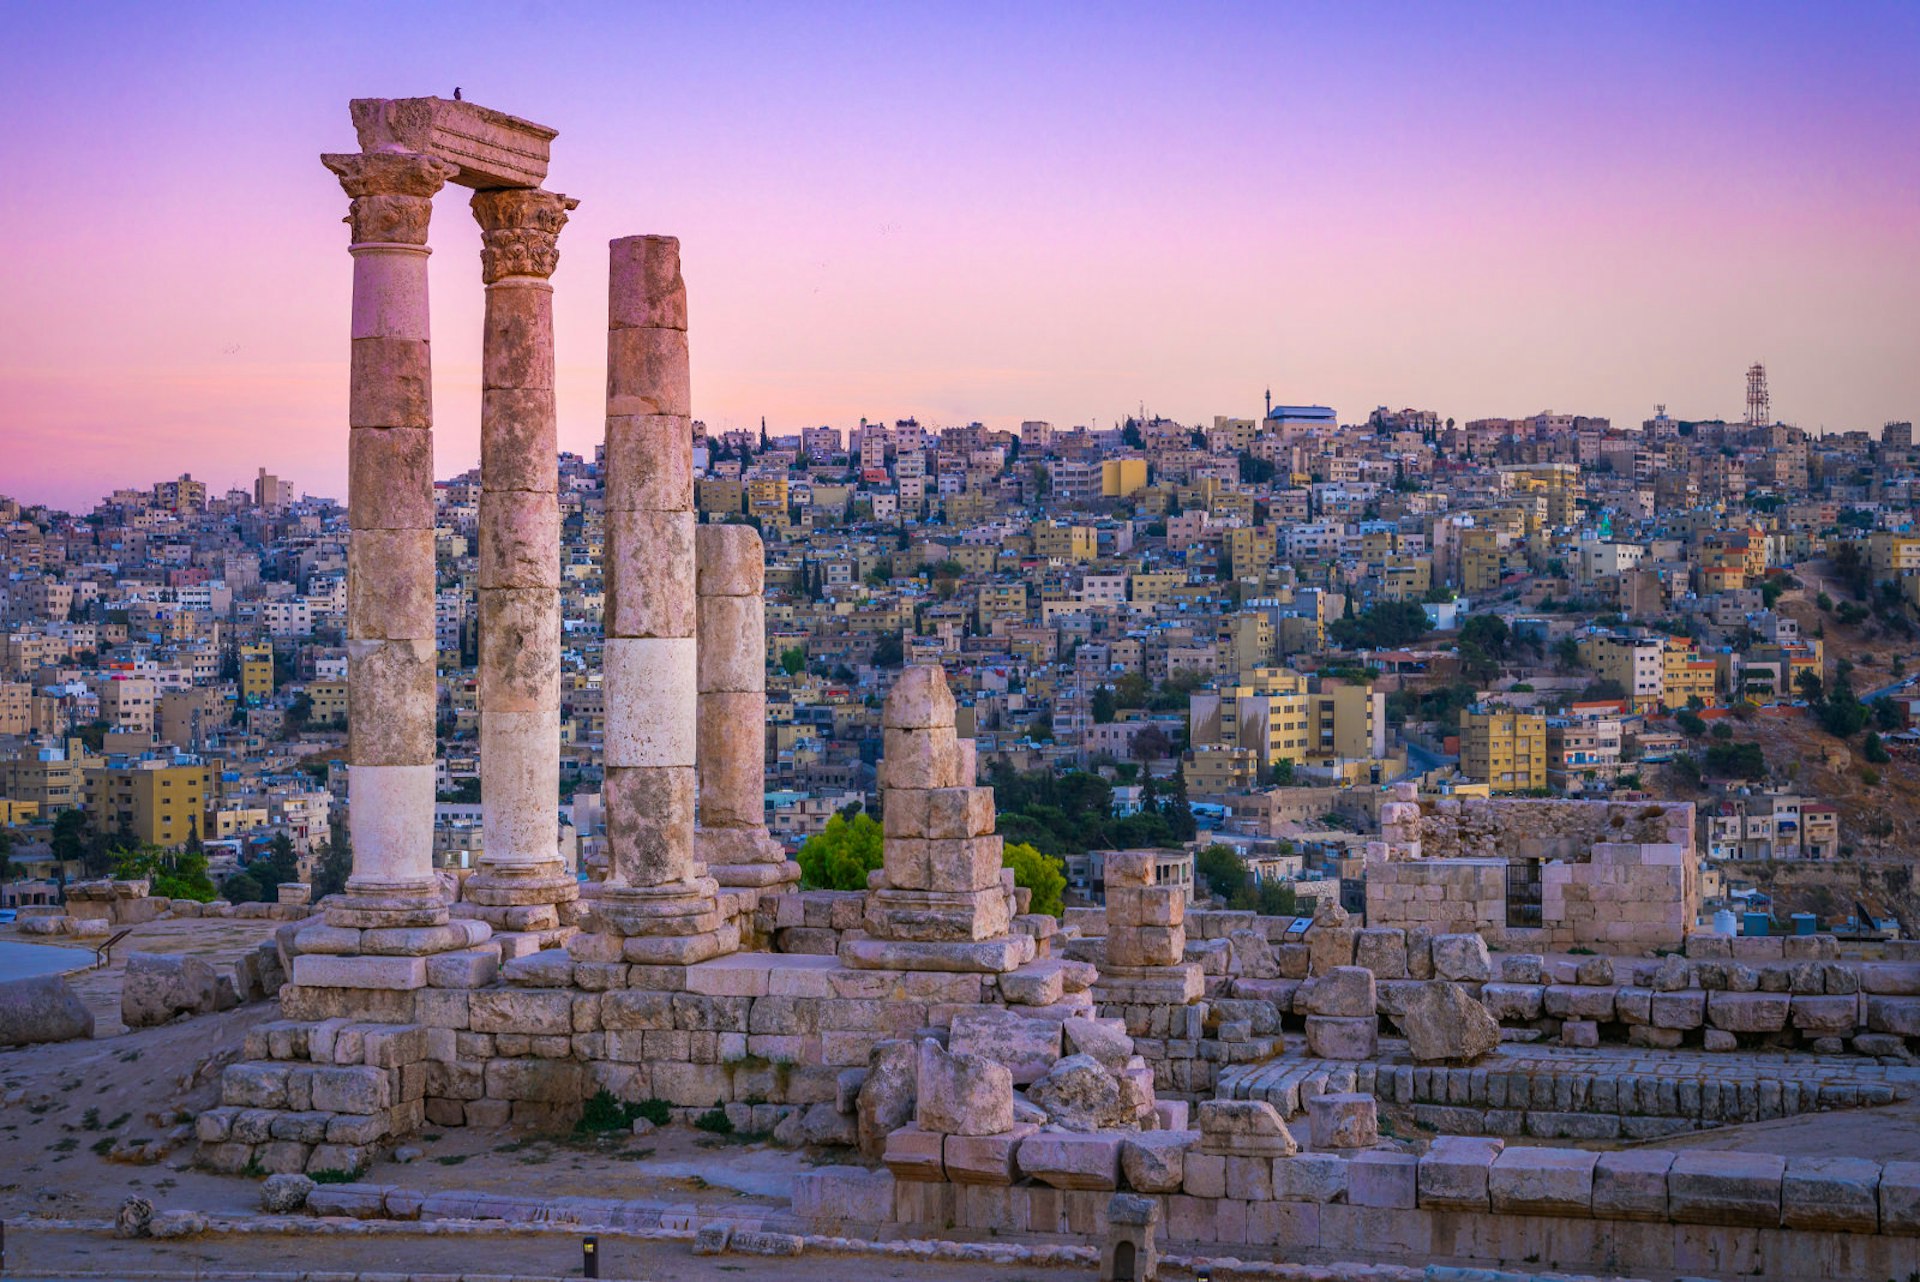 Amman, Jordan, has Roman ruins in the middle of the ancient citadel park in the centre of the city. Sunset on Skyline of Amman and old town of the city with nice view over historic capital of Jordan. Image by mbrand85 / Shutterstock